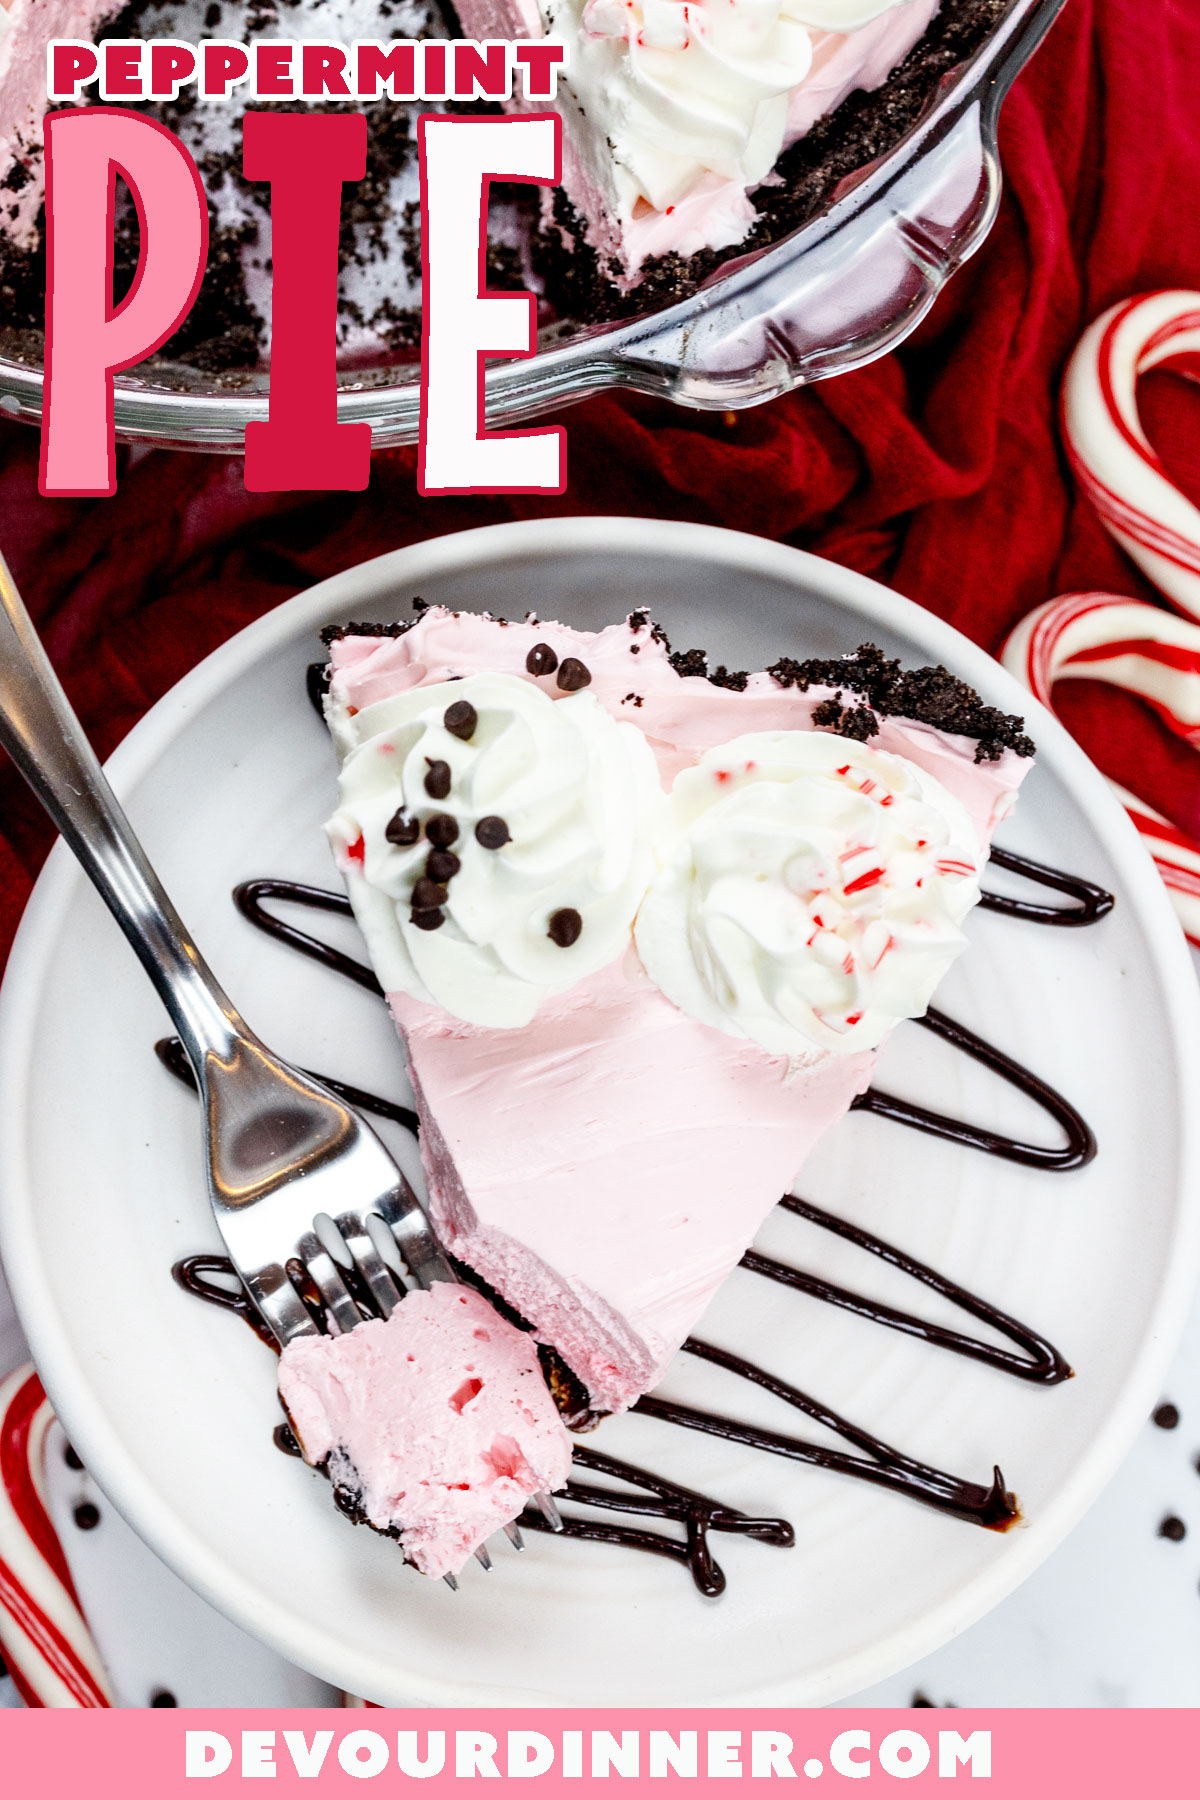 Creamy peppermint pie made with an Oreo cookie crust. This no bake pie recipe is a favorite for the Holidays with it's fun peppermint flavor